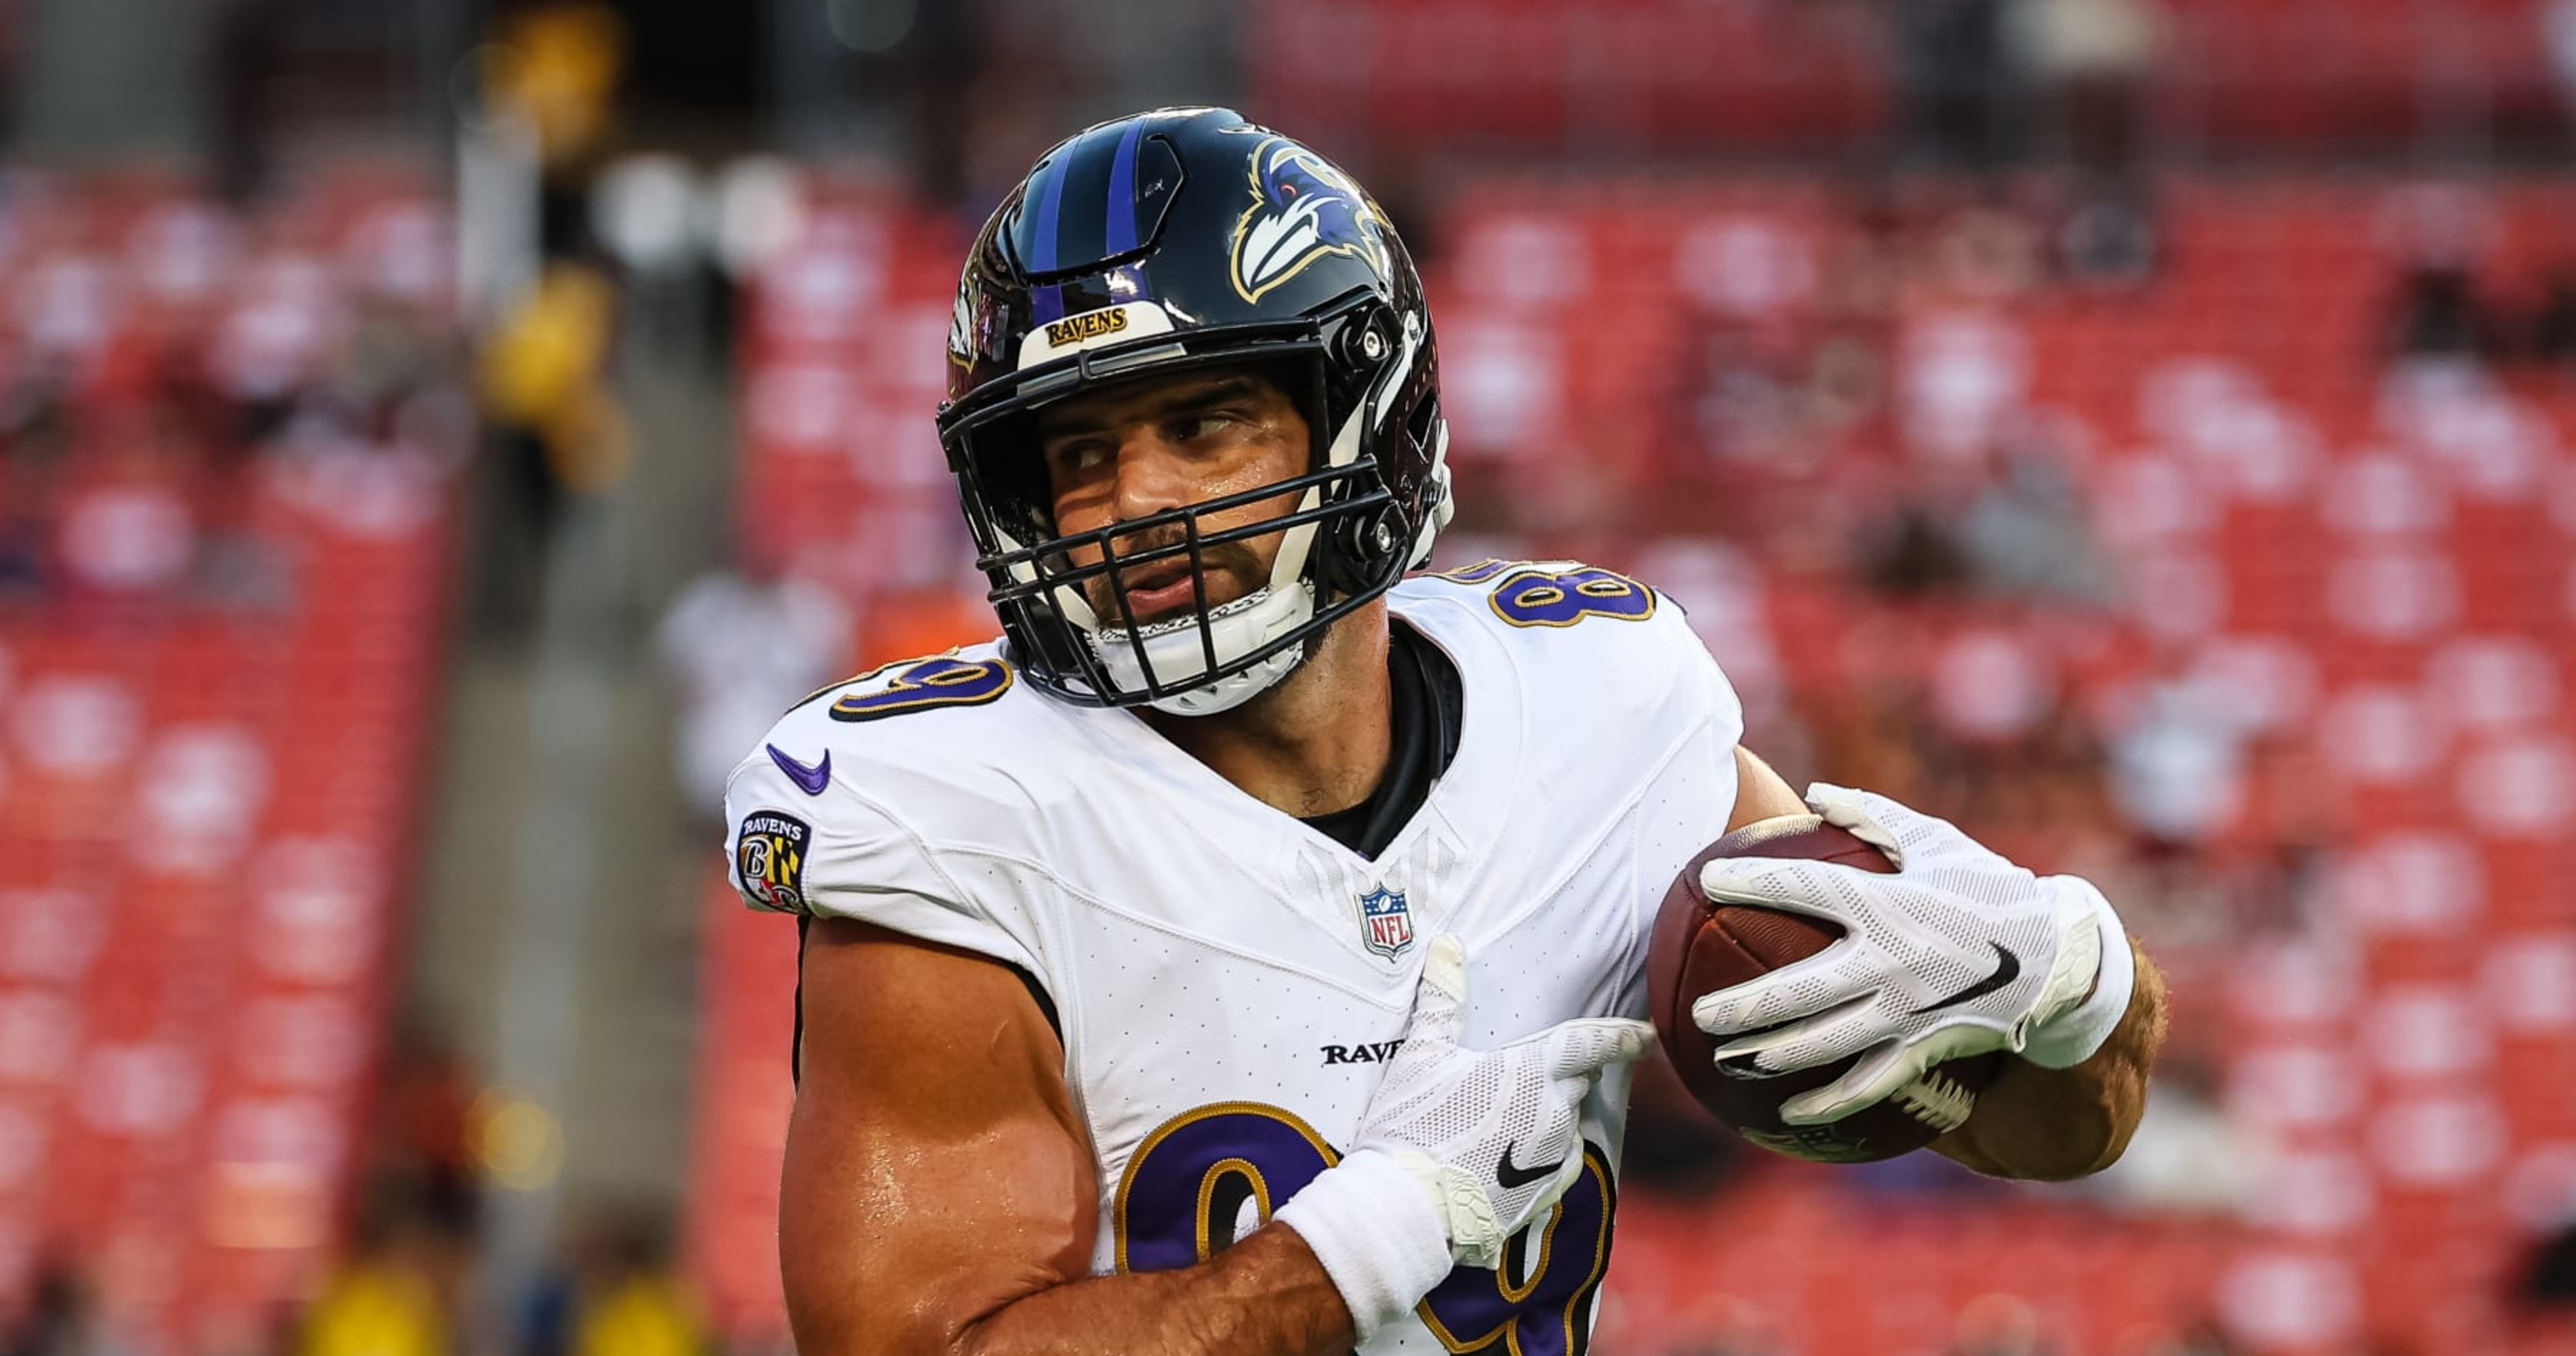 Ravens' Mark Andrews Reportedly Unlikely to Play Opener vs. Texans With Quad Injury